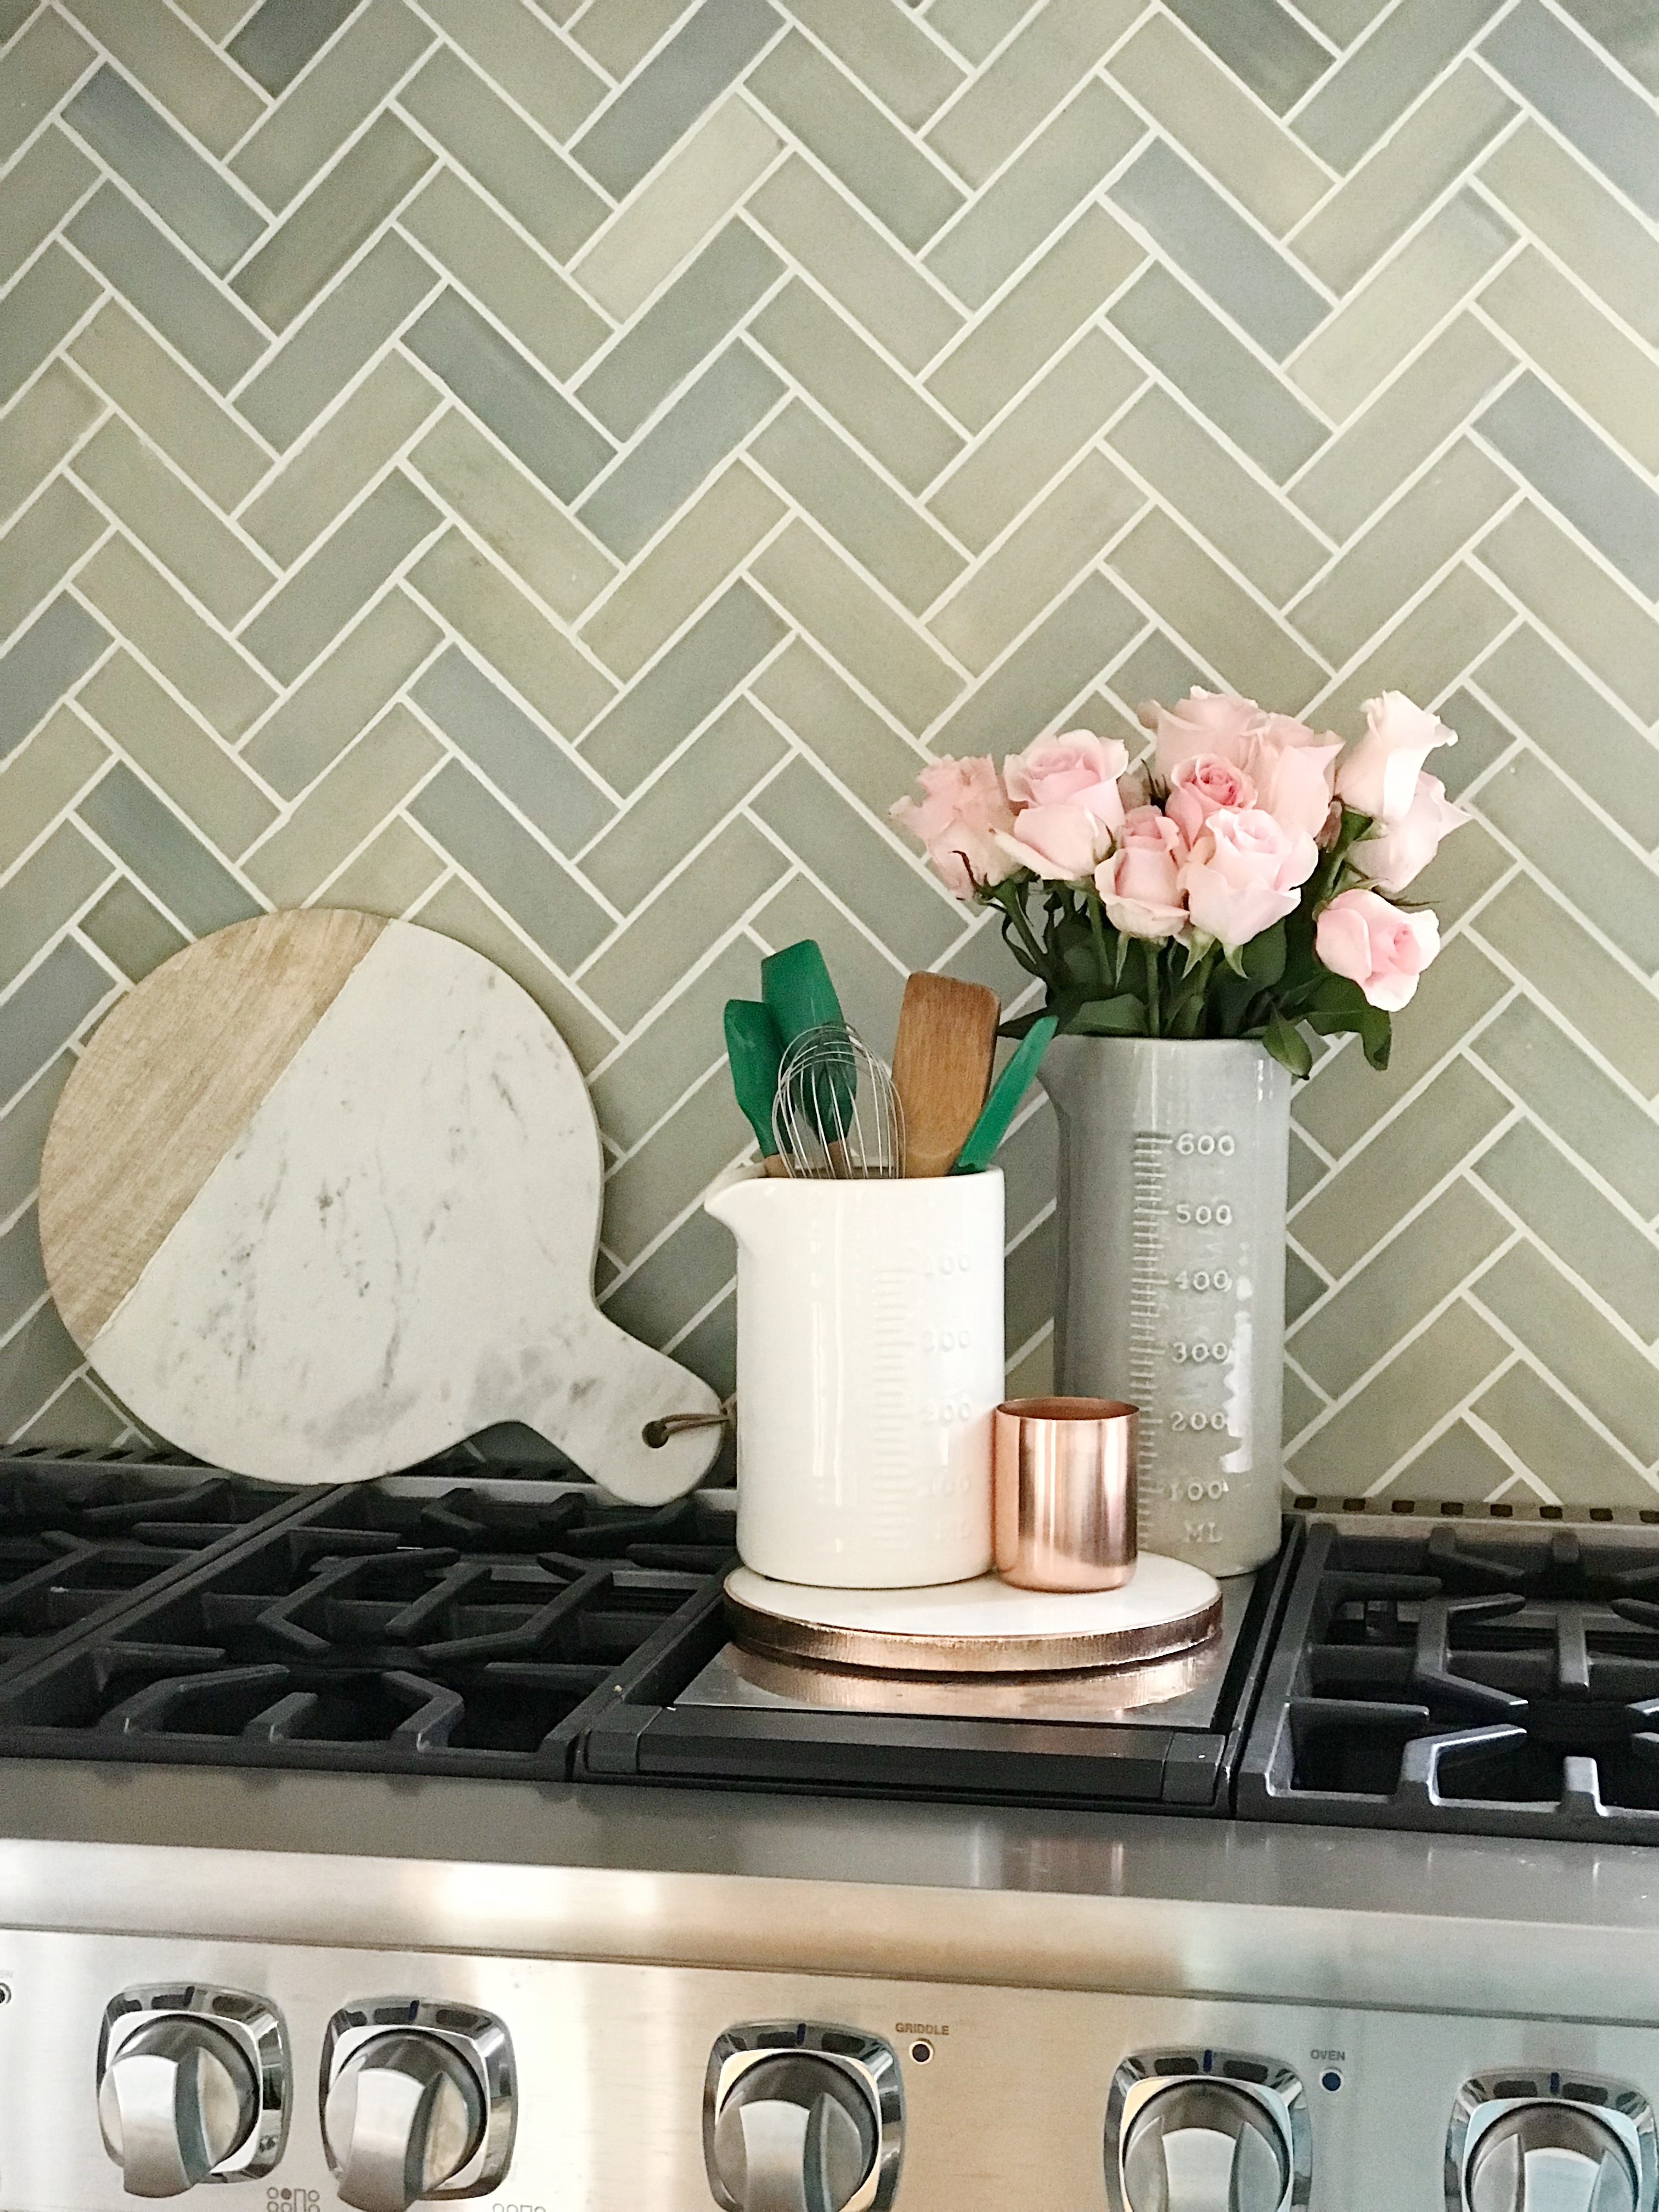 How to Add Decor Accessories to Your Kitchen - The Leslie Style